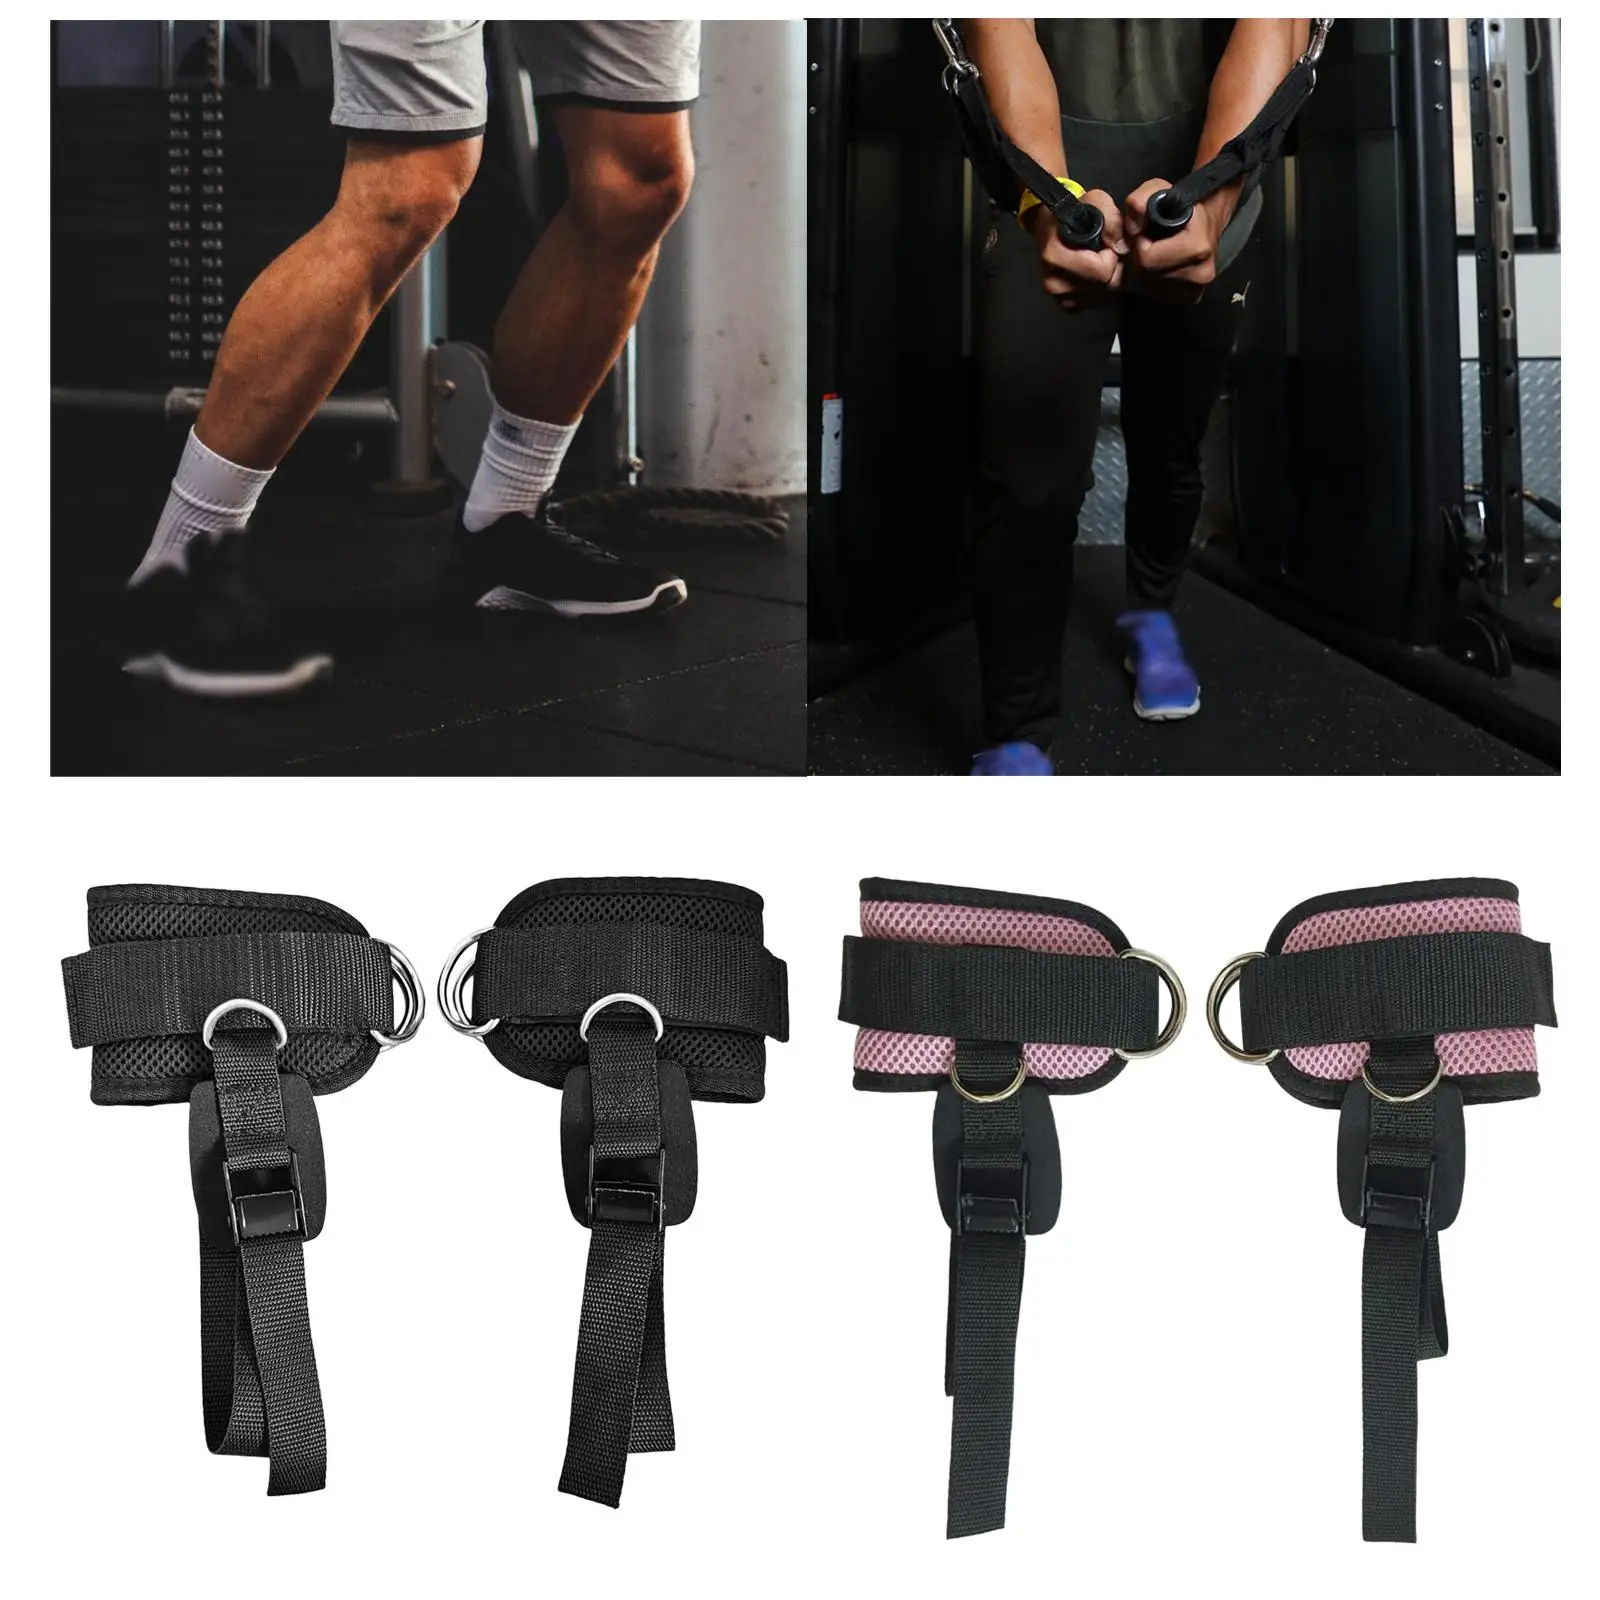 Adjustable Padded Ankle Straps Pedal Rope Butt and Leg Weight Exercises Leg Training Workout Fitness Equipment Ankle Cuffs